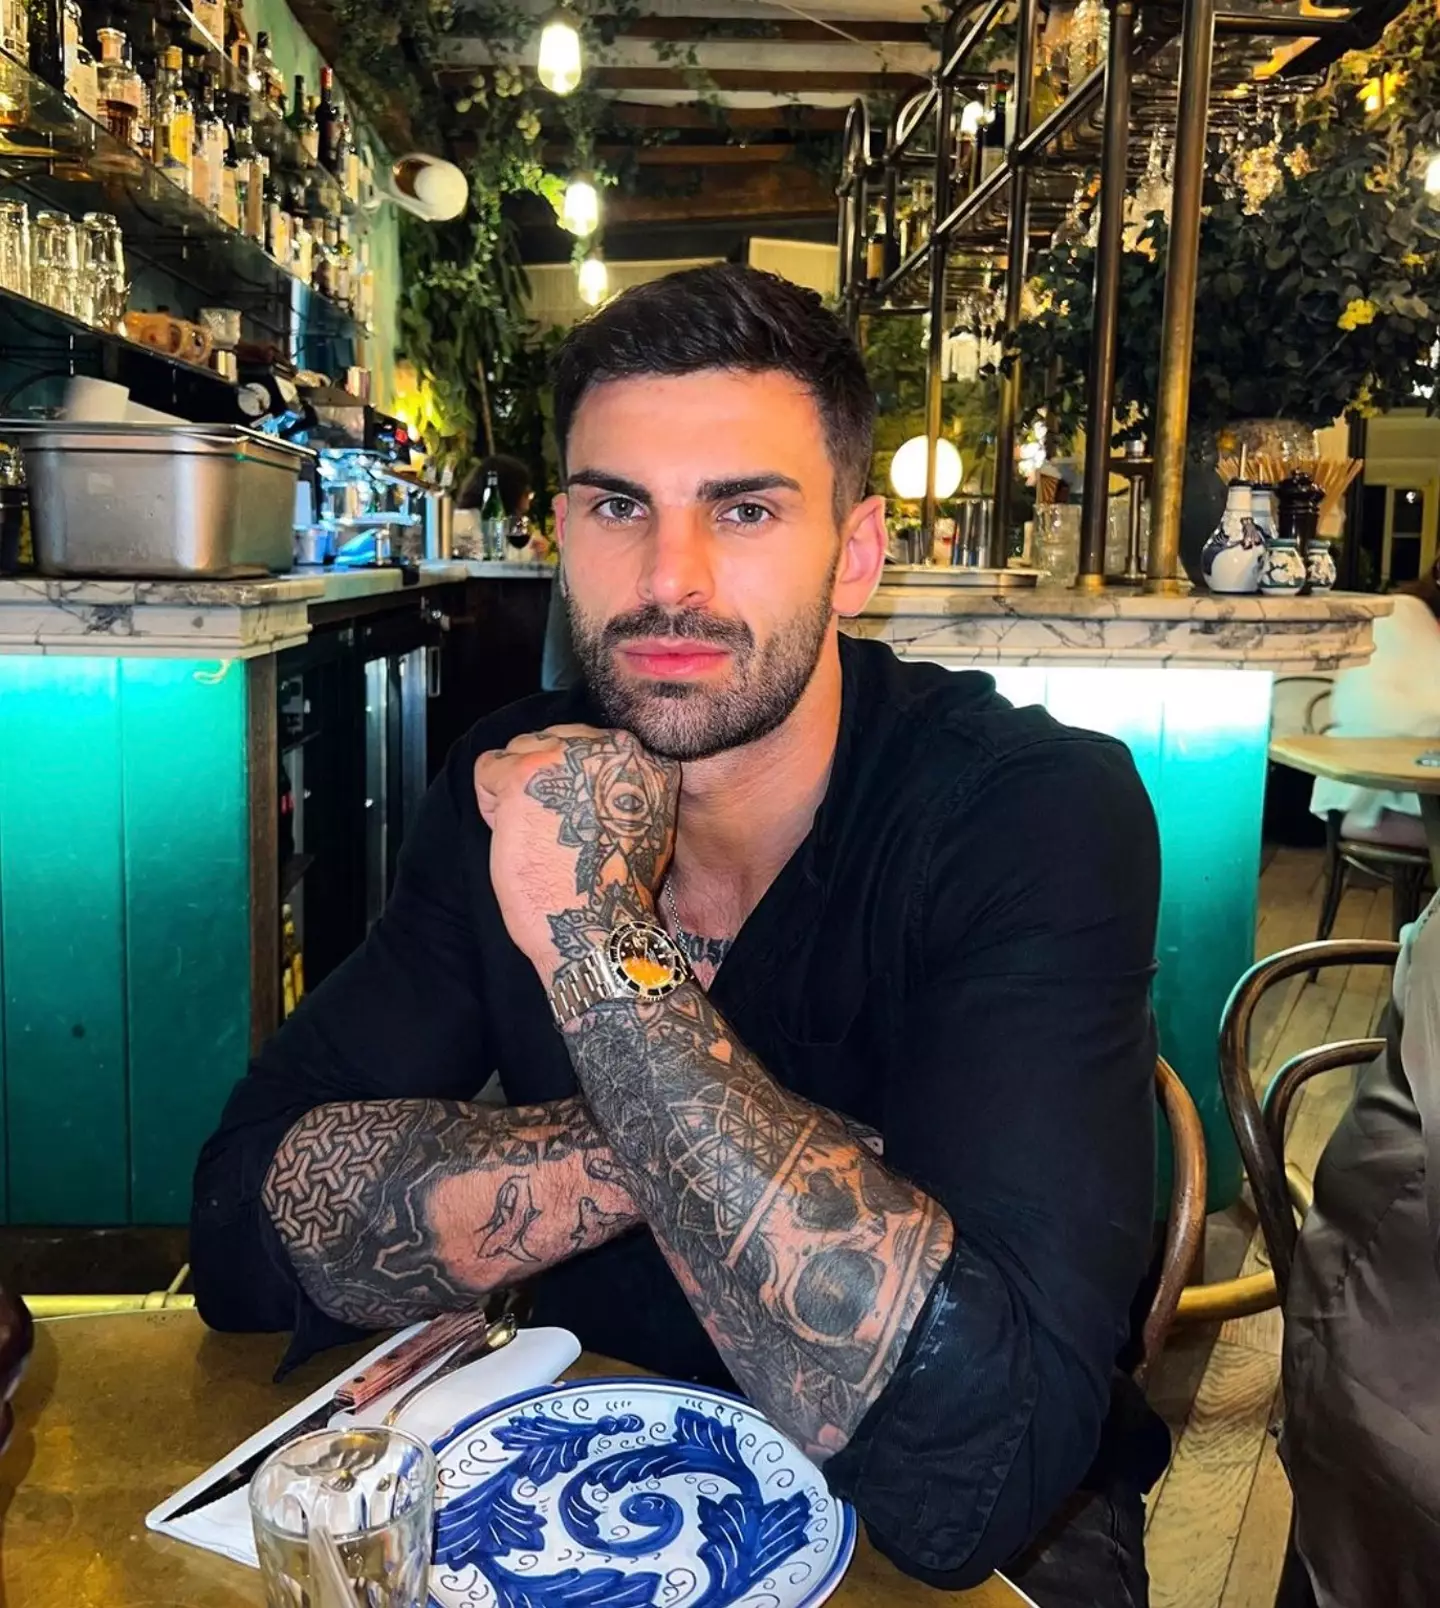 The Love Island star has quite the reputation with the ladies.